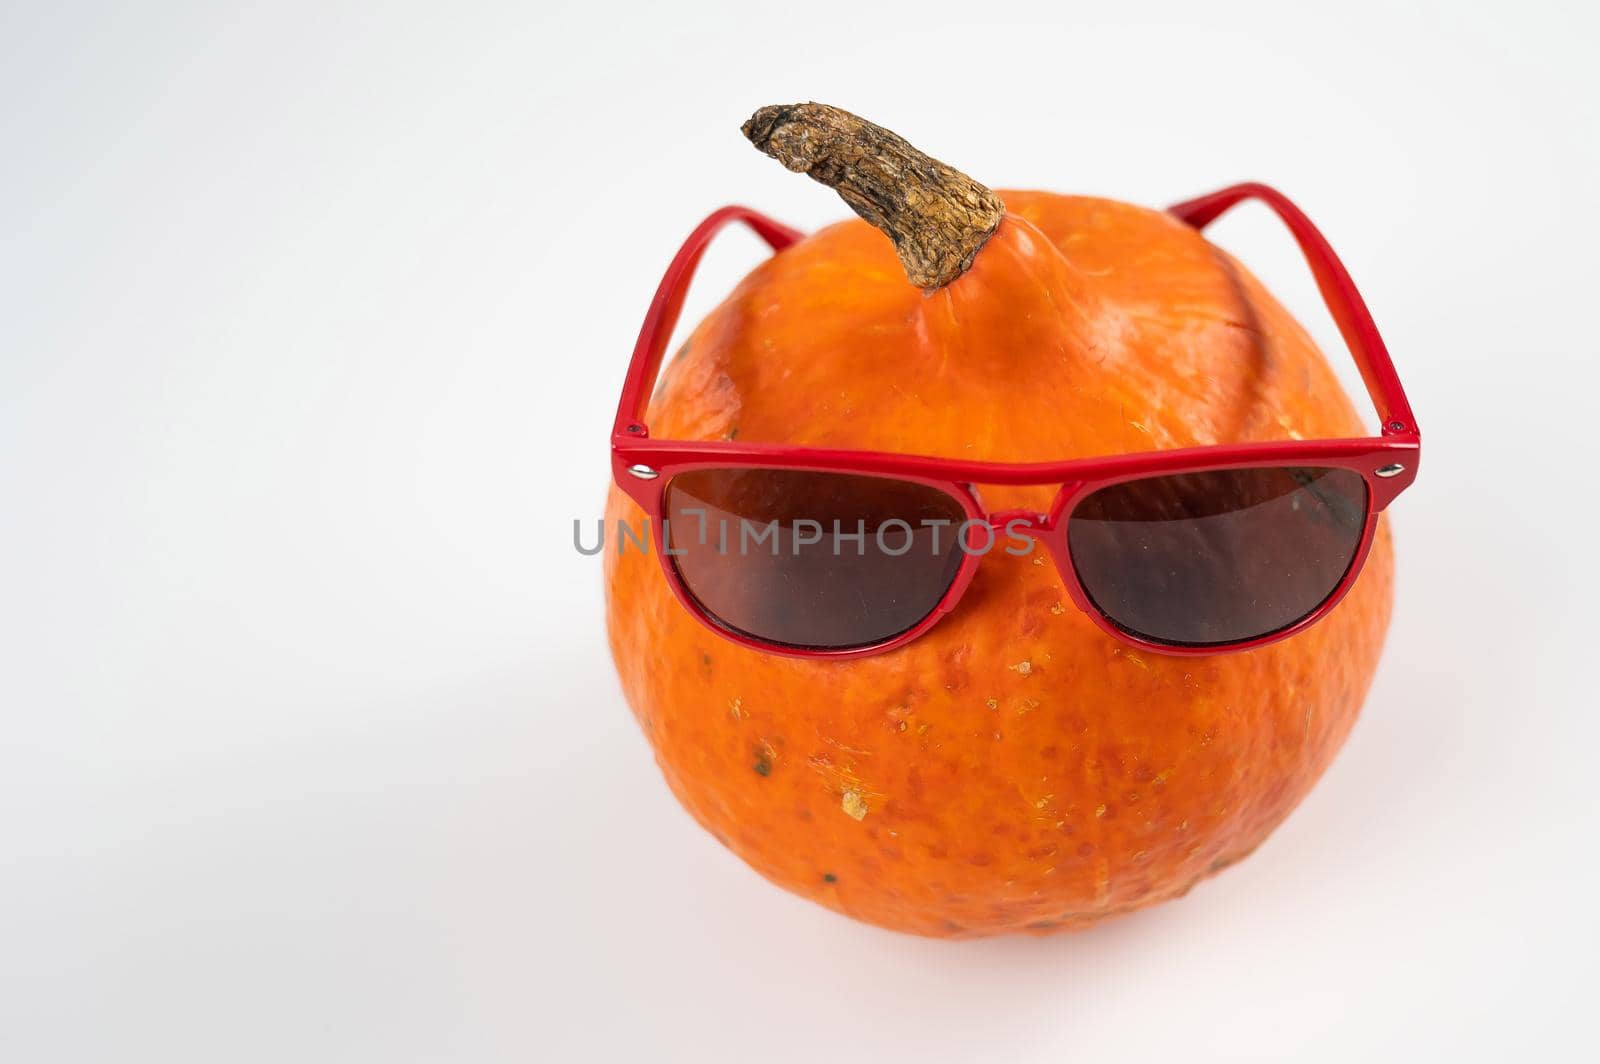 Pumpkin in sunglasses on a white background. Halloween symbol. Isolate. by mrwed54